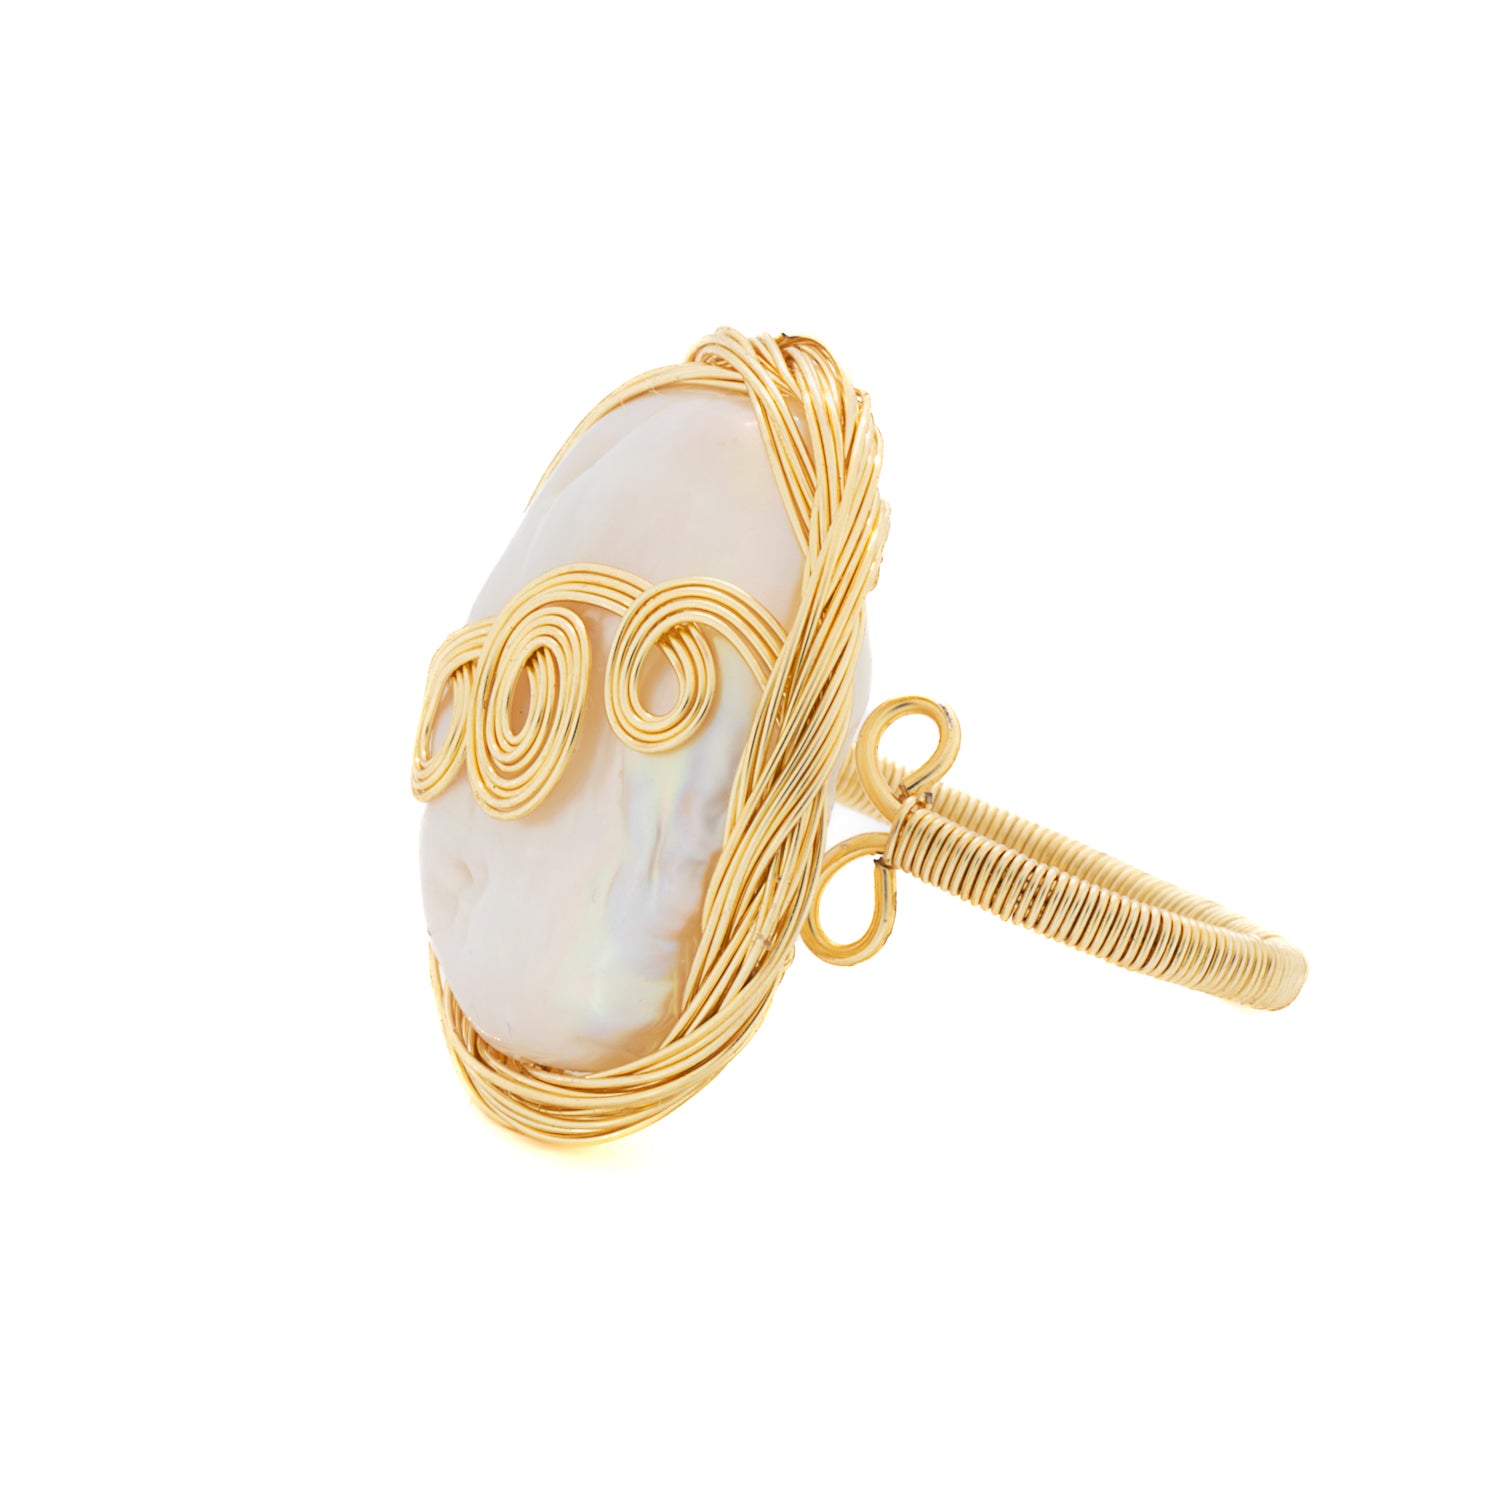 Cleopatra Pearl & Gold Spiral Ring - Exquisite Handcrafted Design